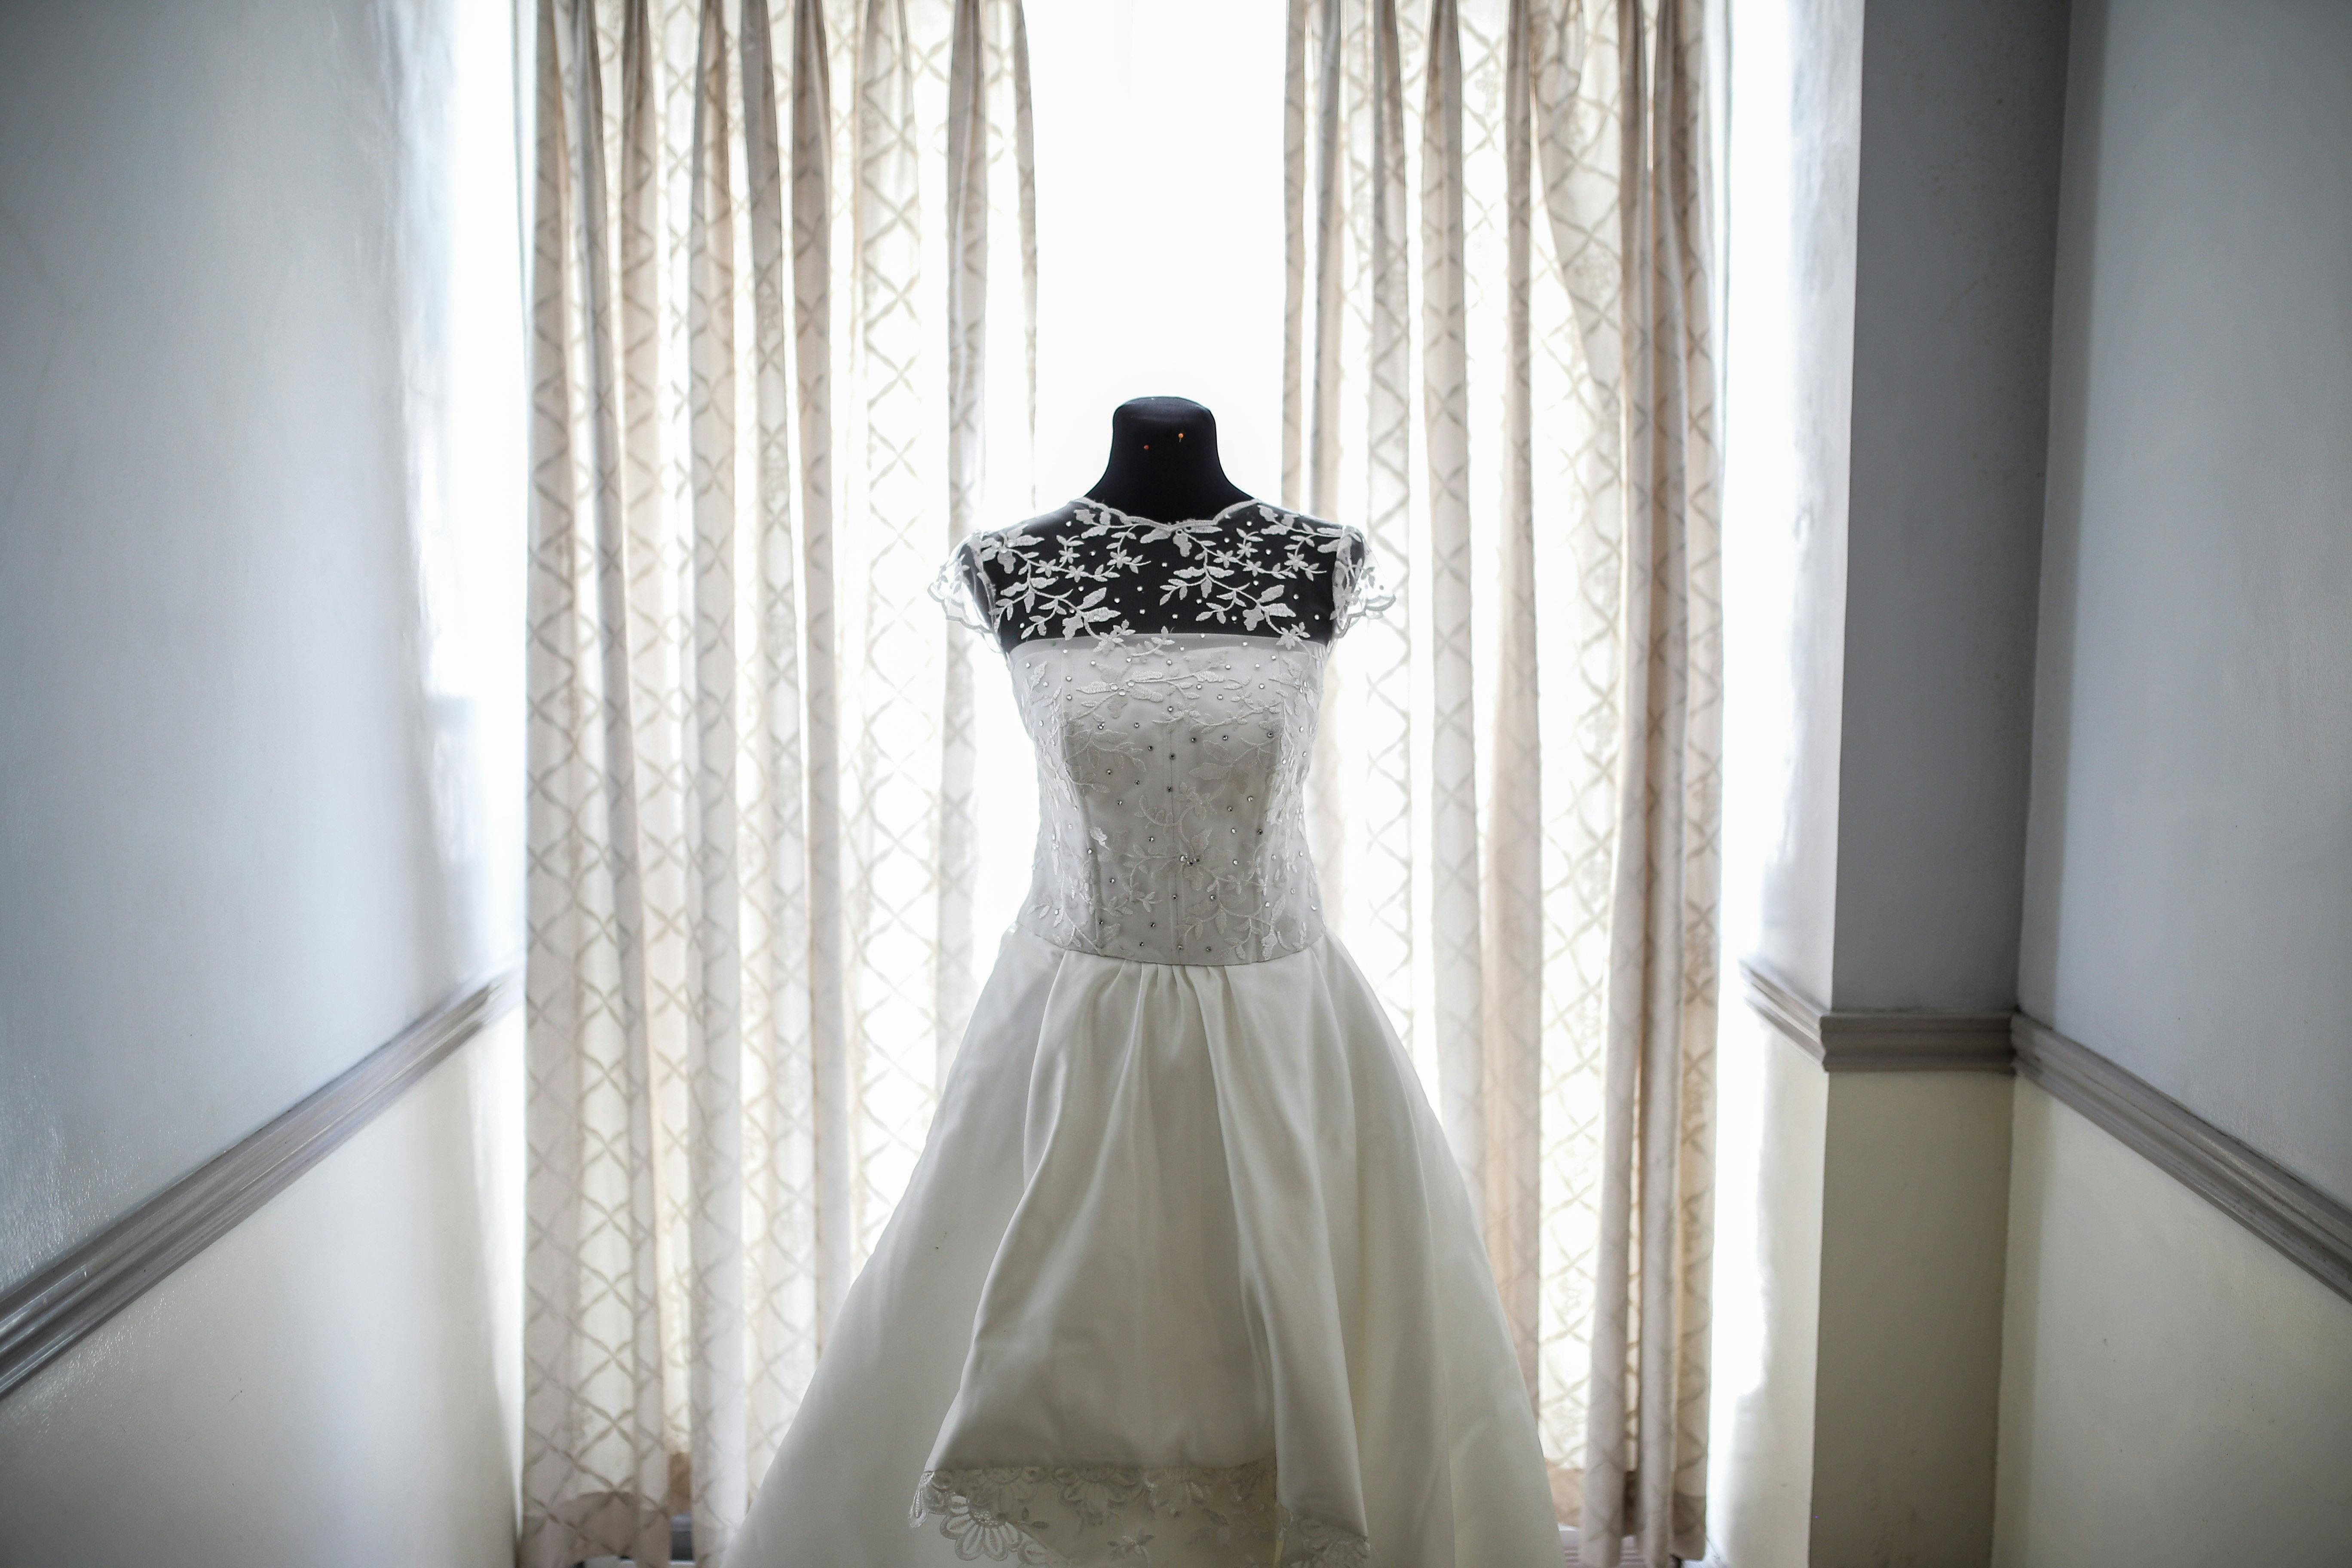 A wedding dress on display on a mannequin | Source: Pexels